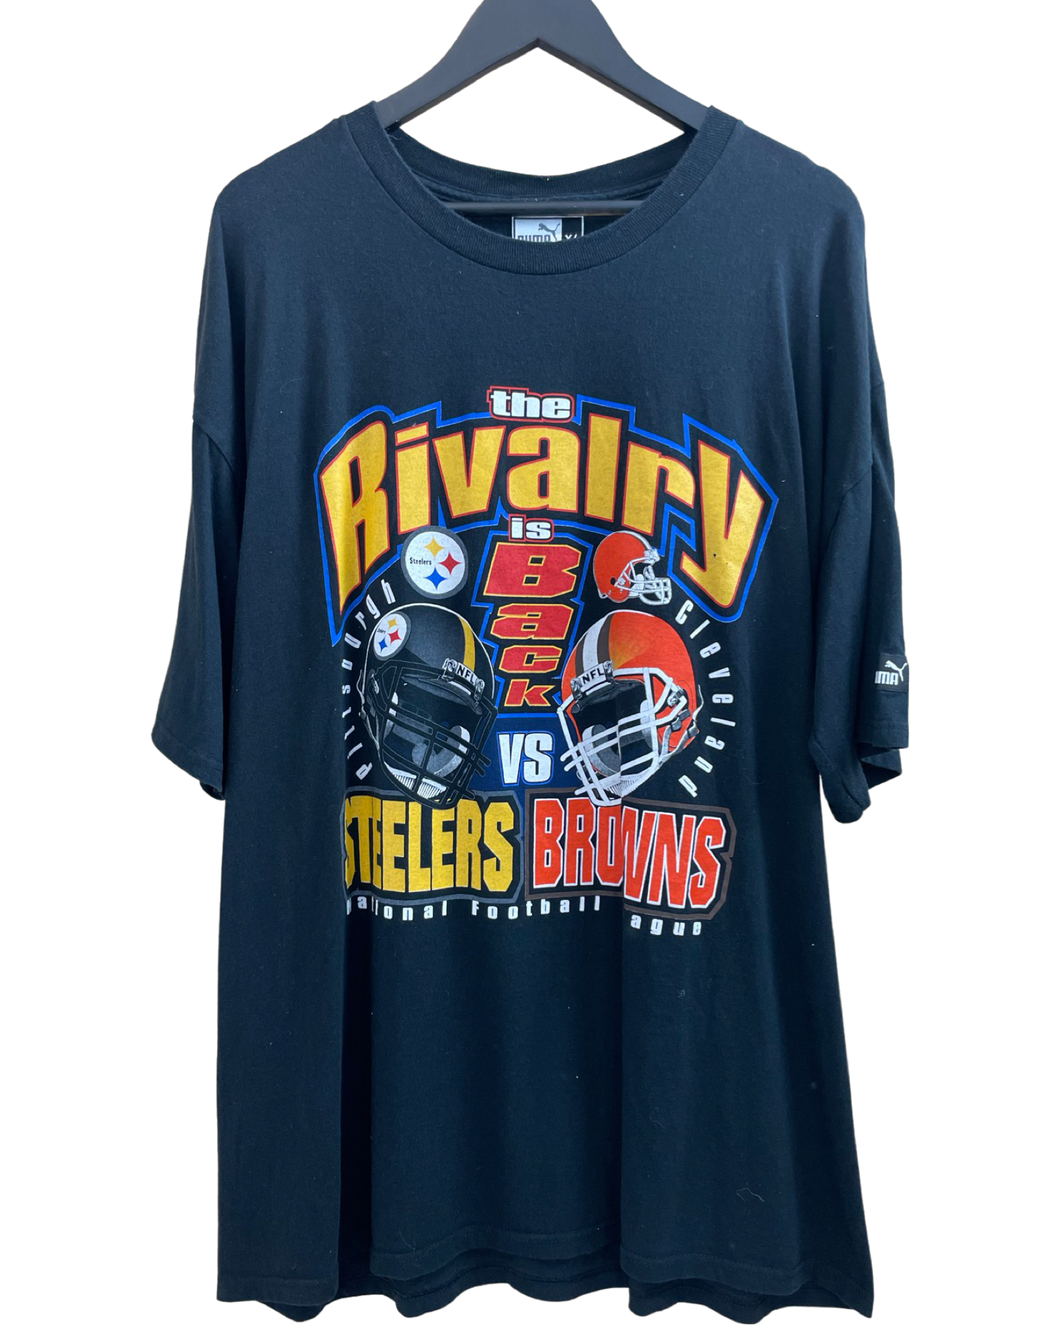 THE RIVALRY STEELERS VS BROWNS TEE - XL